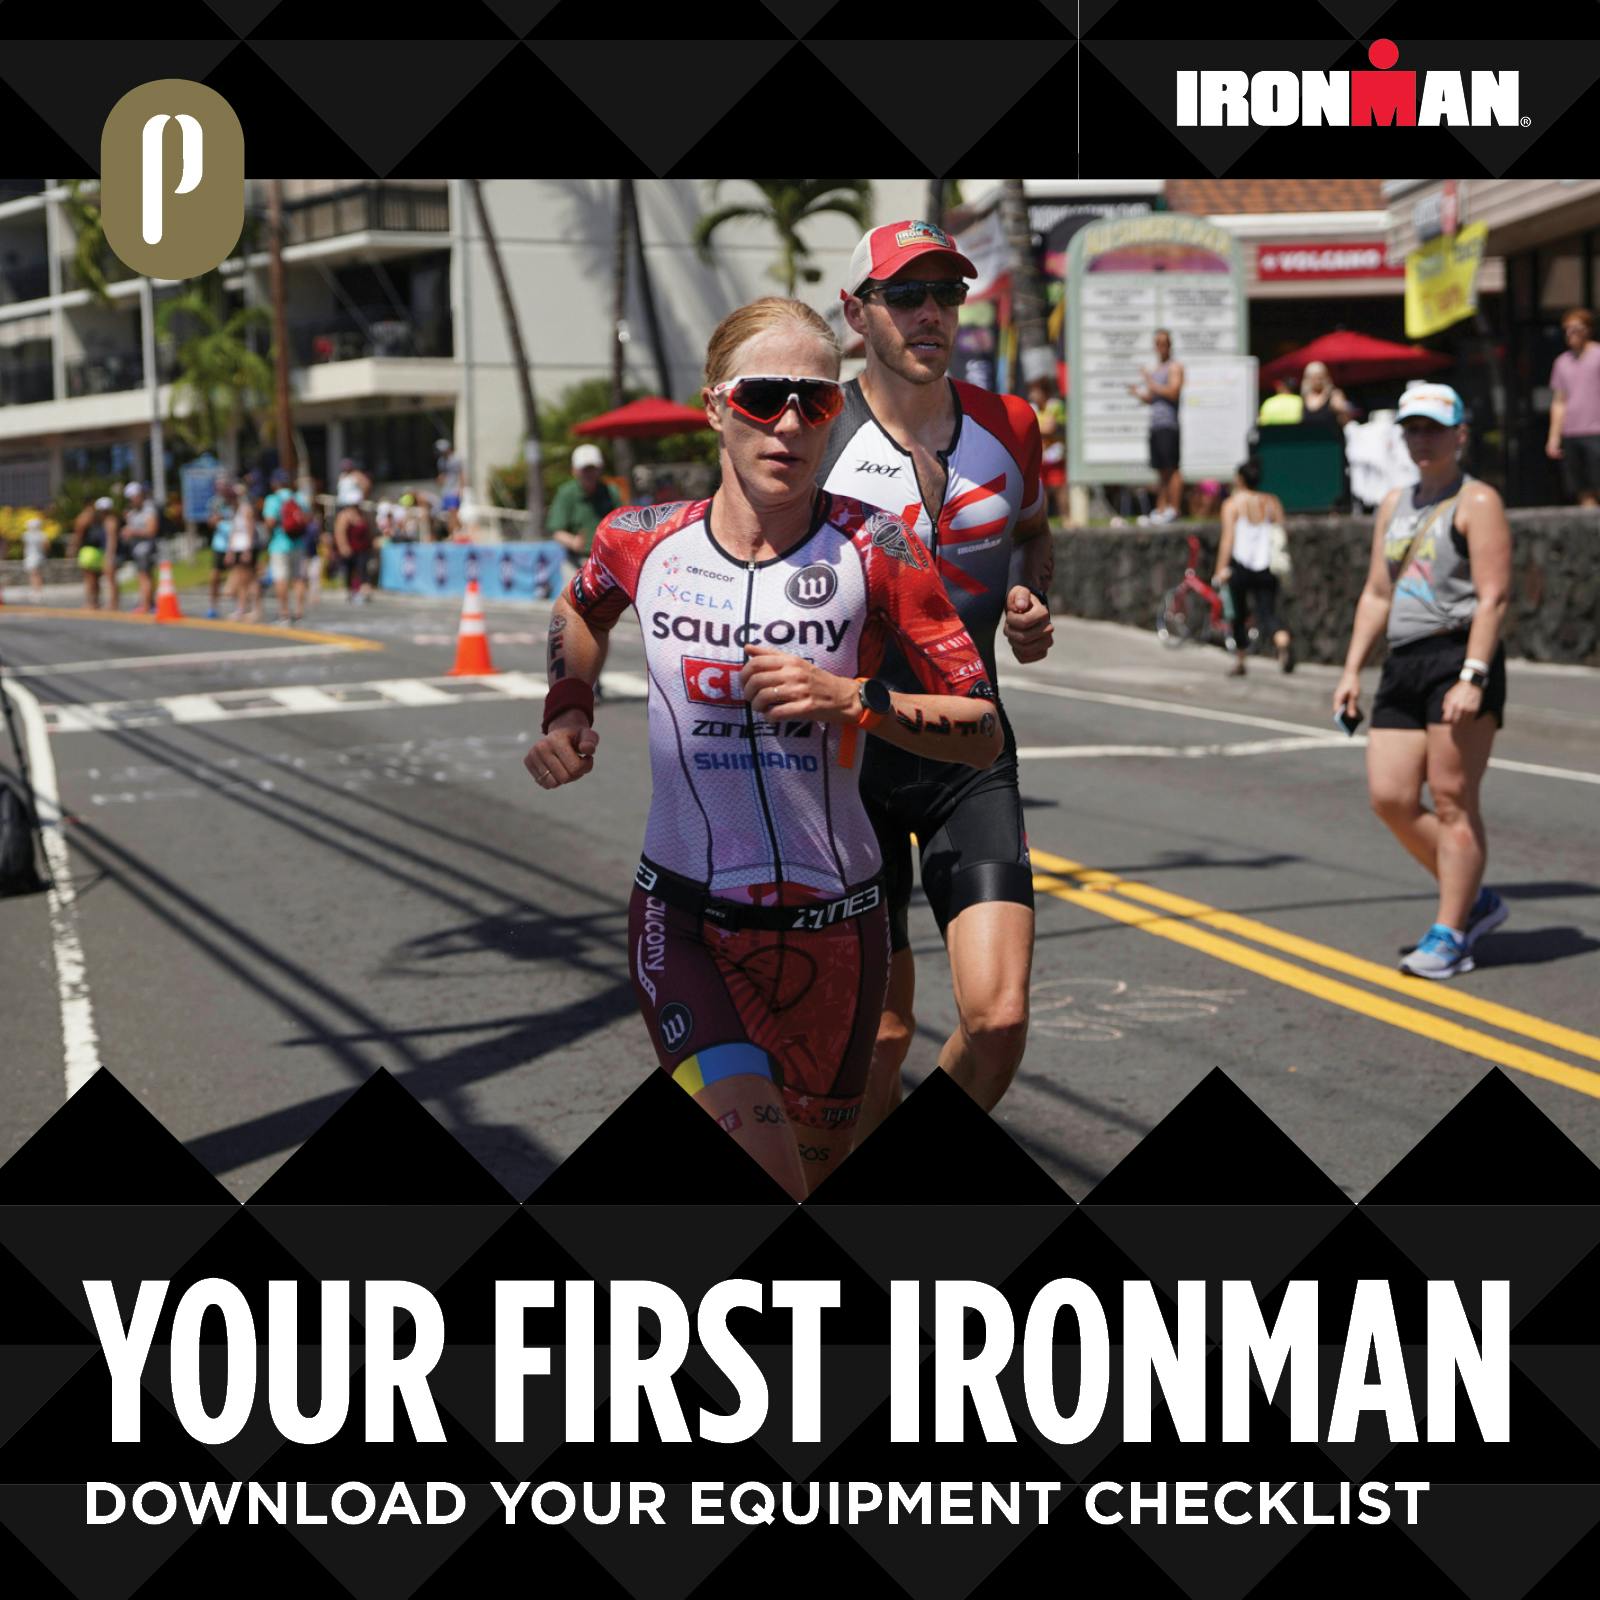 The Essential IRONMAN Equipment Checklist and Logistics Guide